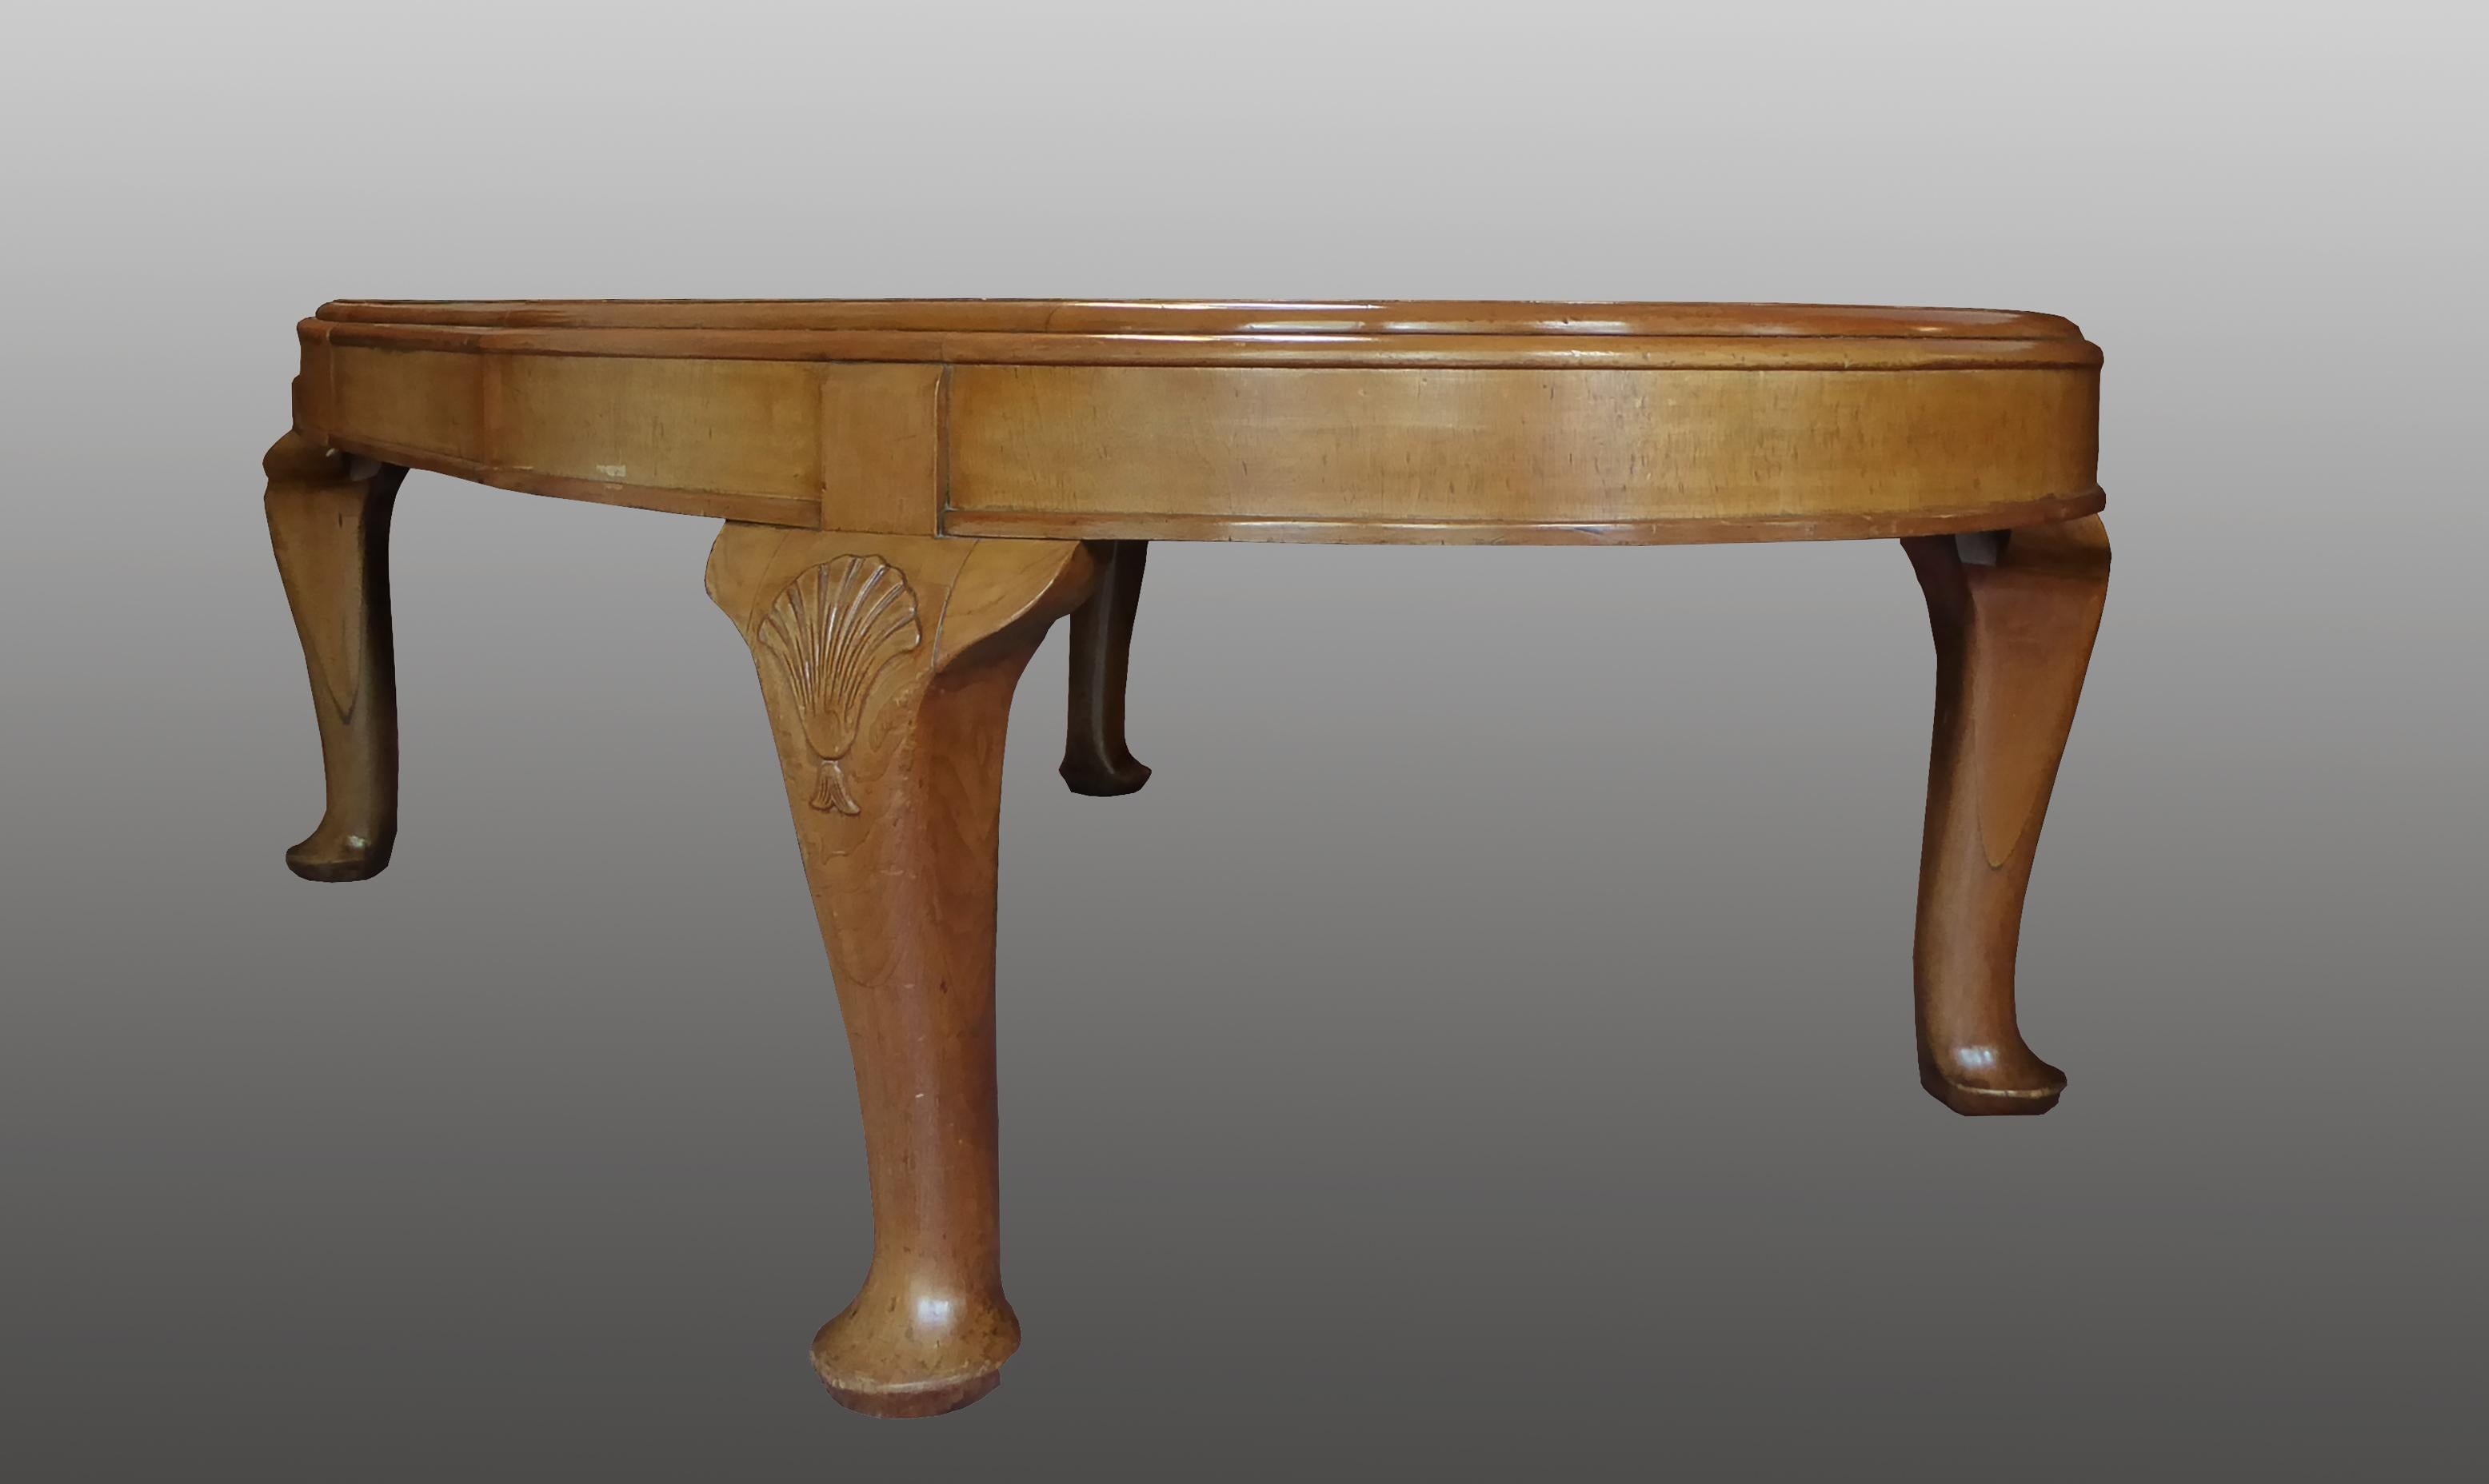 Dining table of the finest quality. Made in solid walnut, of a rich honey color. In excellent condition. This table extends to 240cms / 94 inches and has one leaf, which may be removed allowing the table to reduce to 180cms almost a circle. Height